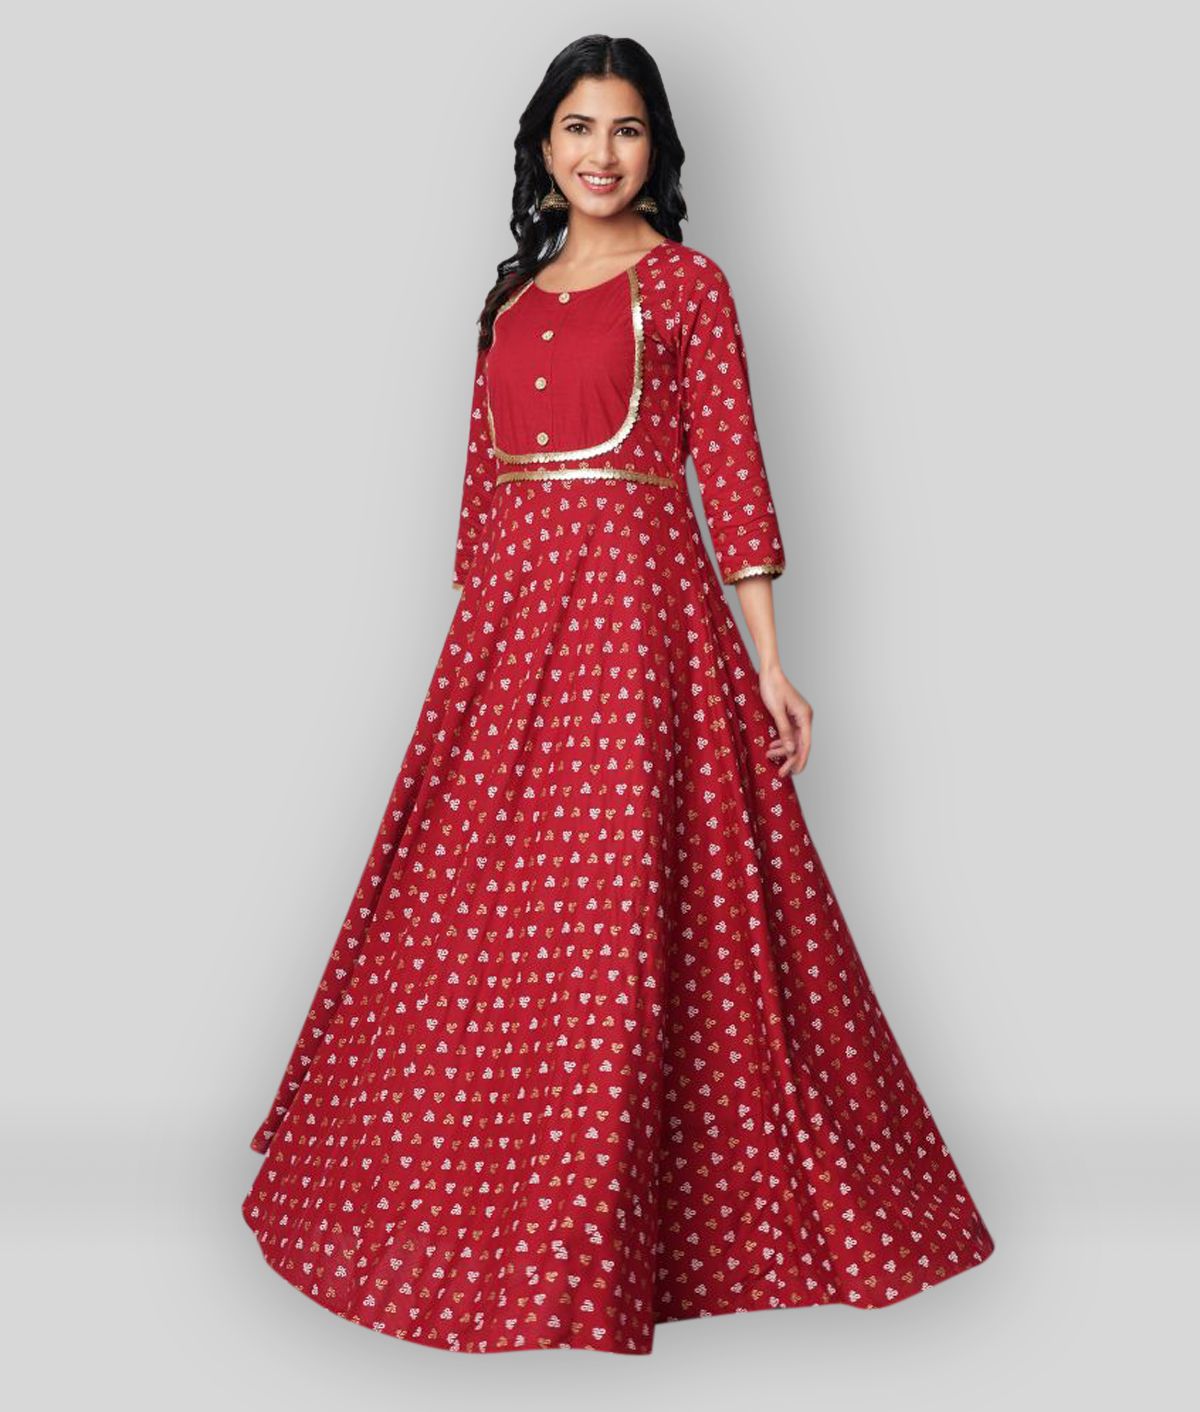 GOD BLESS - Maroon Anarkali Rayon Women's Stitched Ethnic Gown ( Pack of 1 )